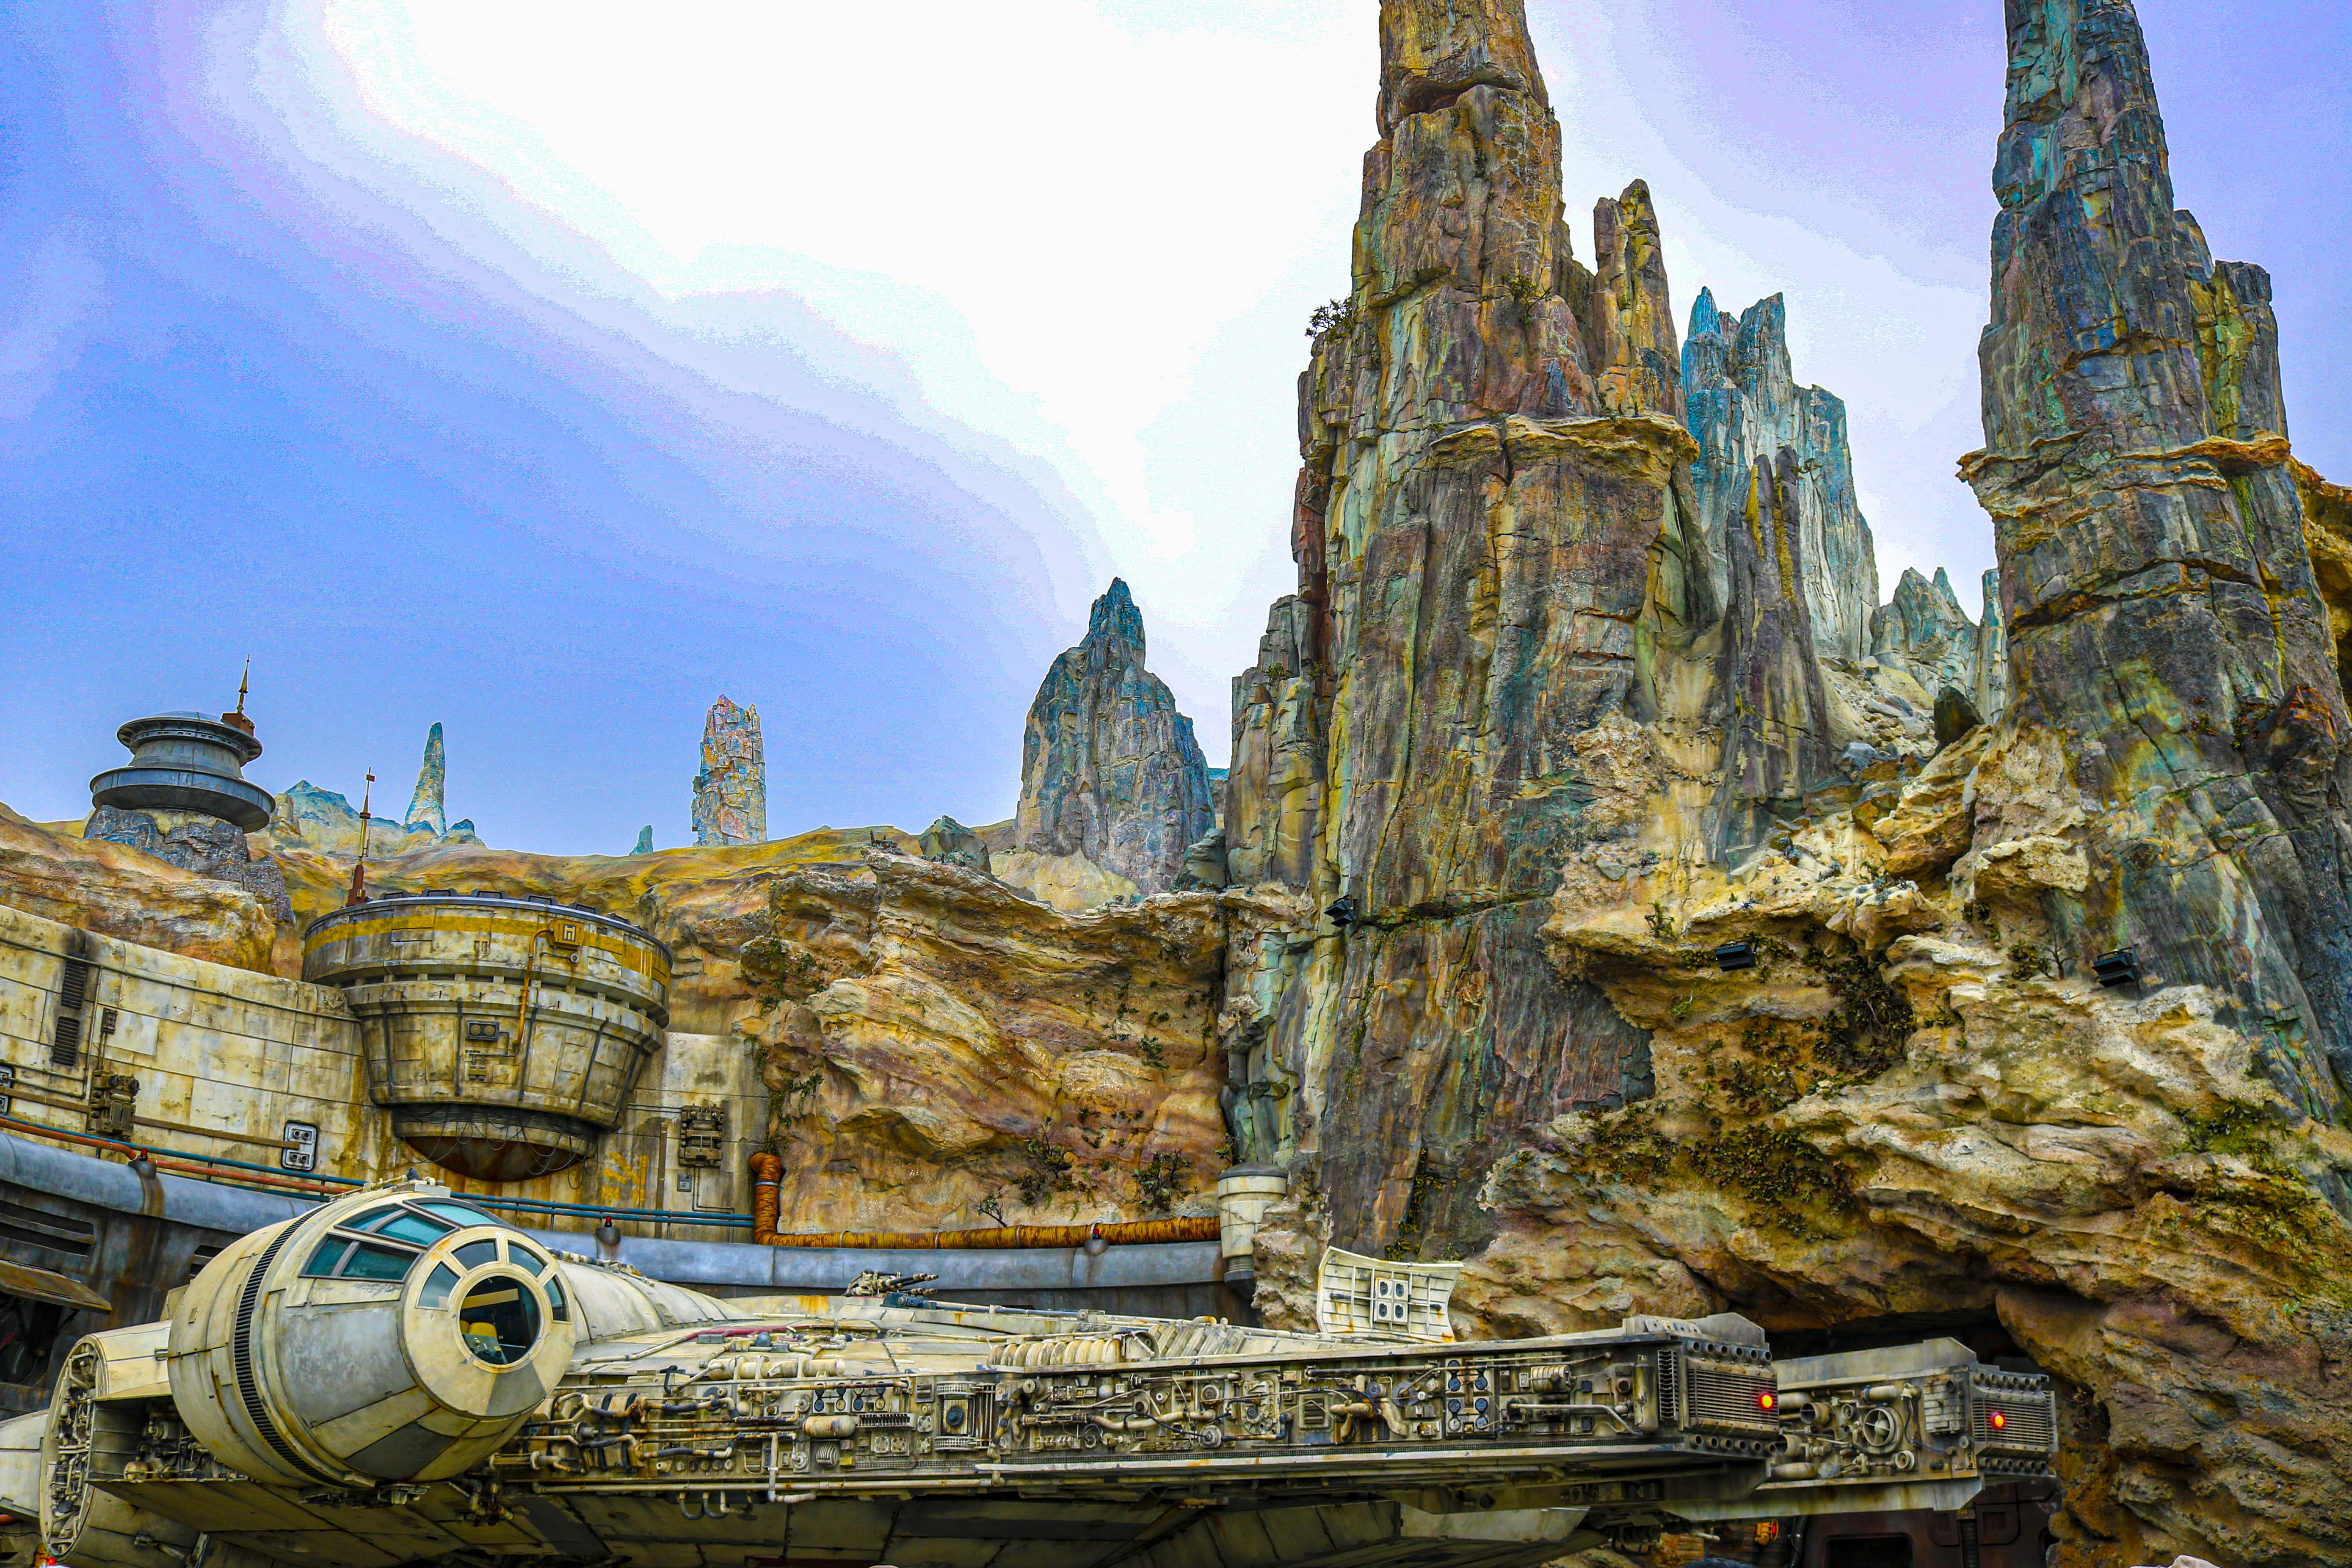 The sun peaks through the misty clouds beyond Black Spire Outpost's Spaceport at Star Wars: Galaxy's Edge. 